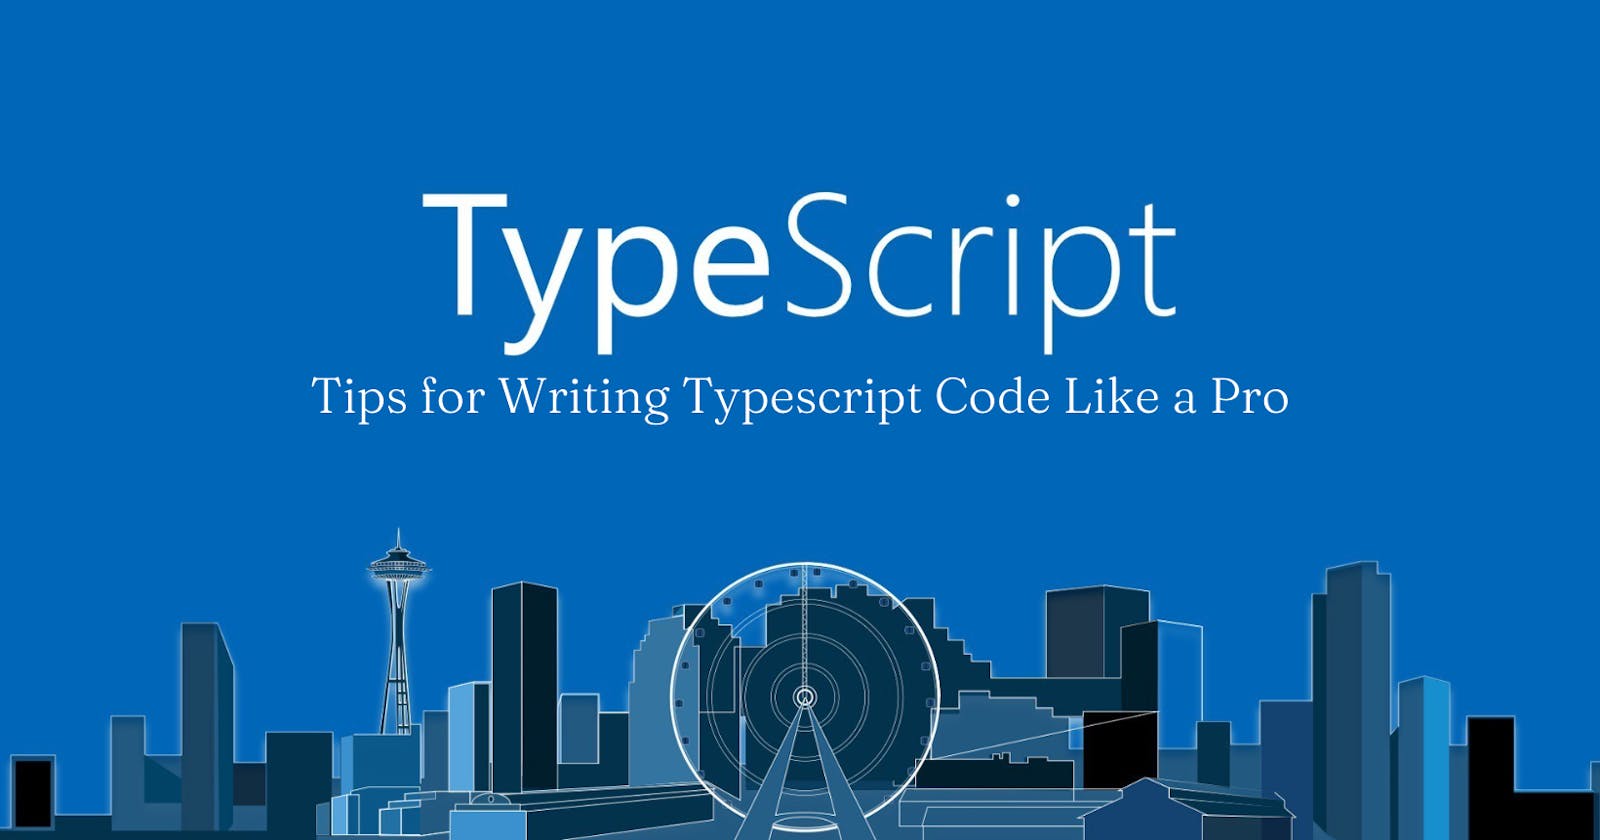 5 Tips for Writing Typescript Code Like a Pro